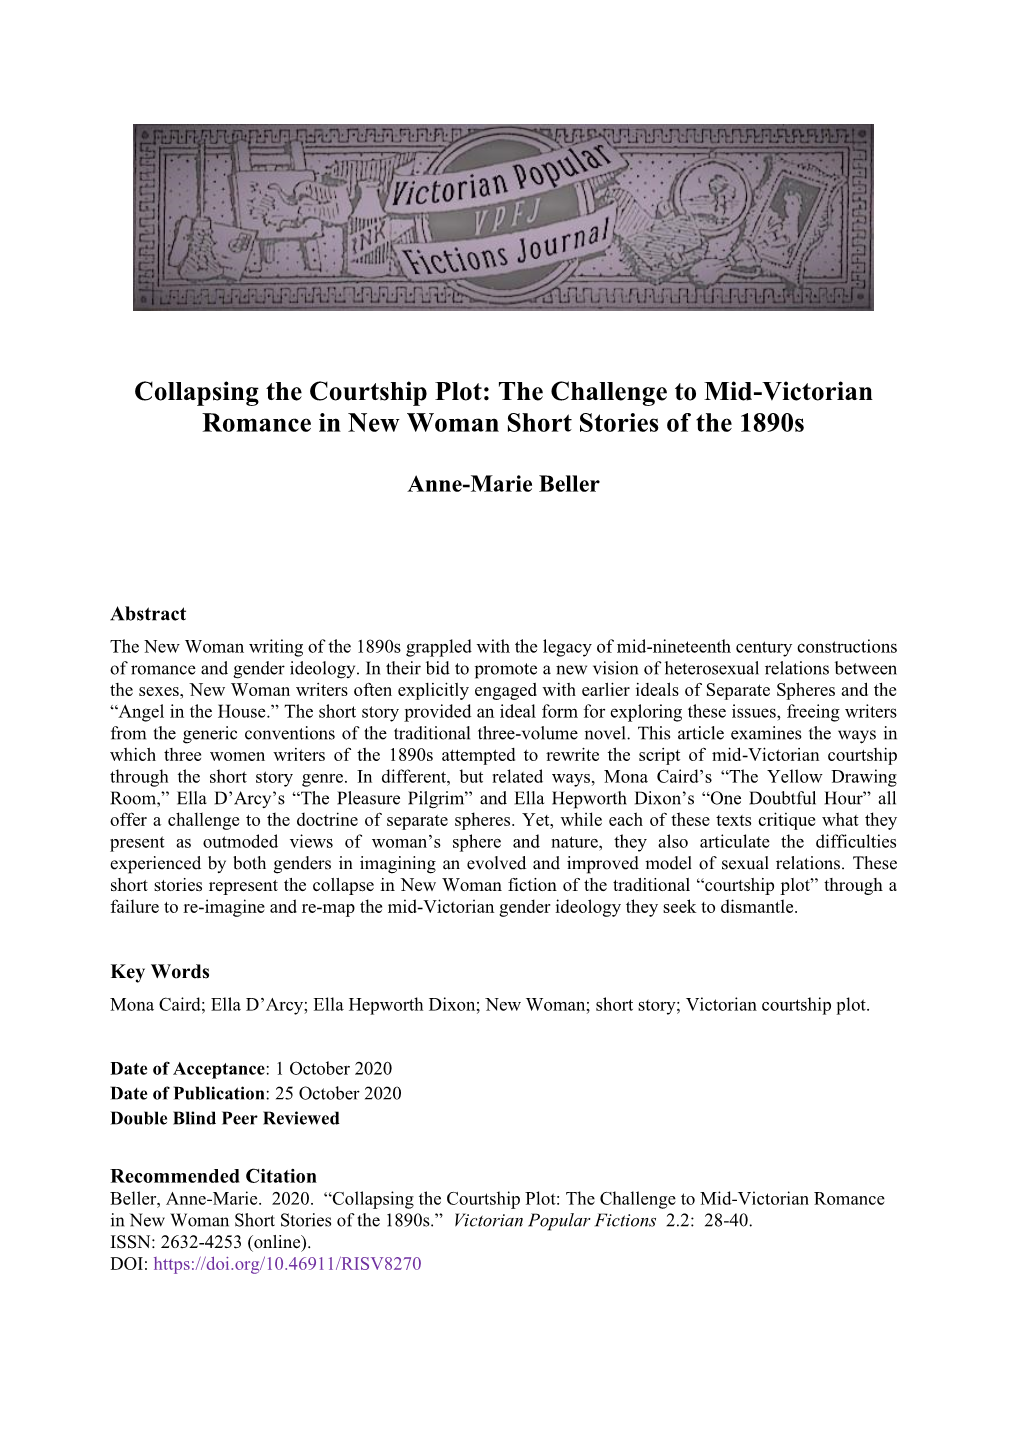 Collapsing the Courtship Plot: the Challenge to Mid-Victorian Romance in New Woman Short Stories of the 1890S